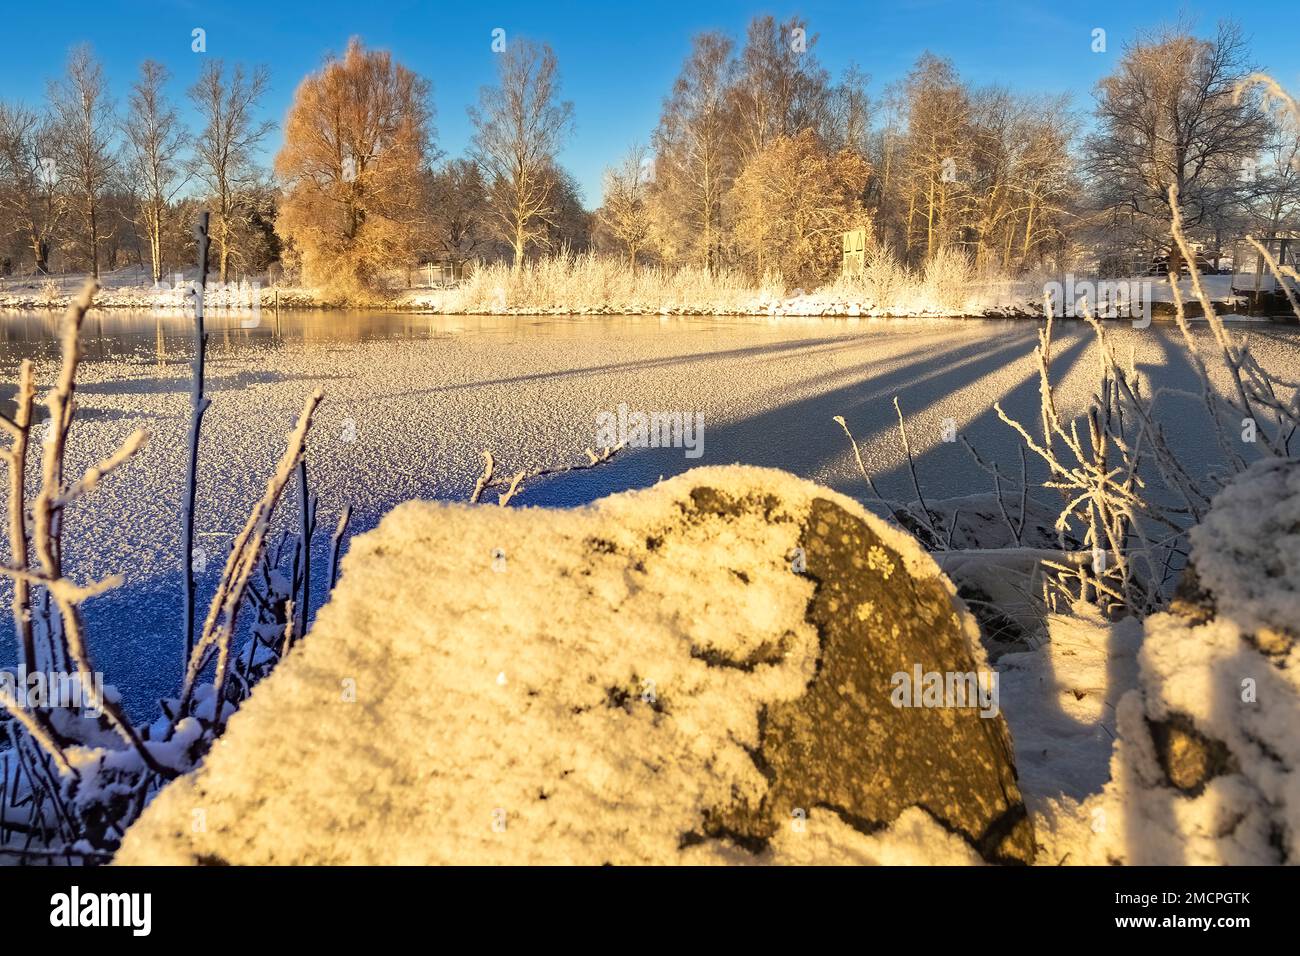 Afternoon winter pictures from Ludvika Dalarna Sweden. Stock Photo